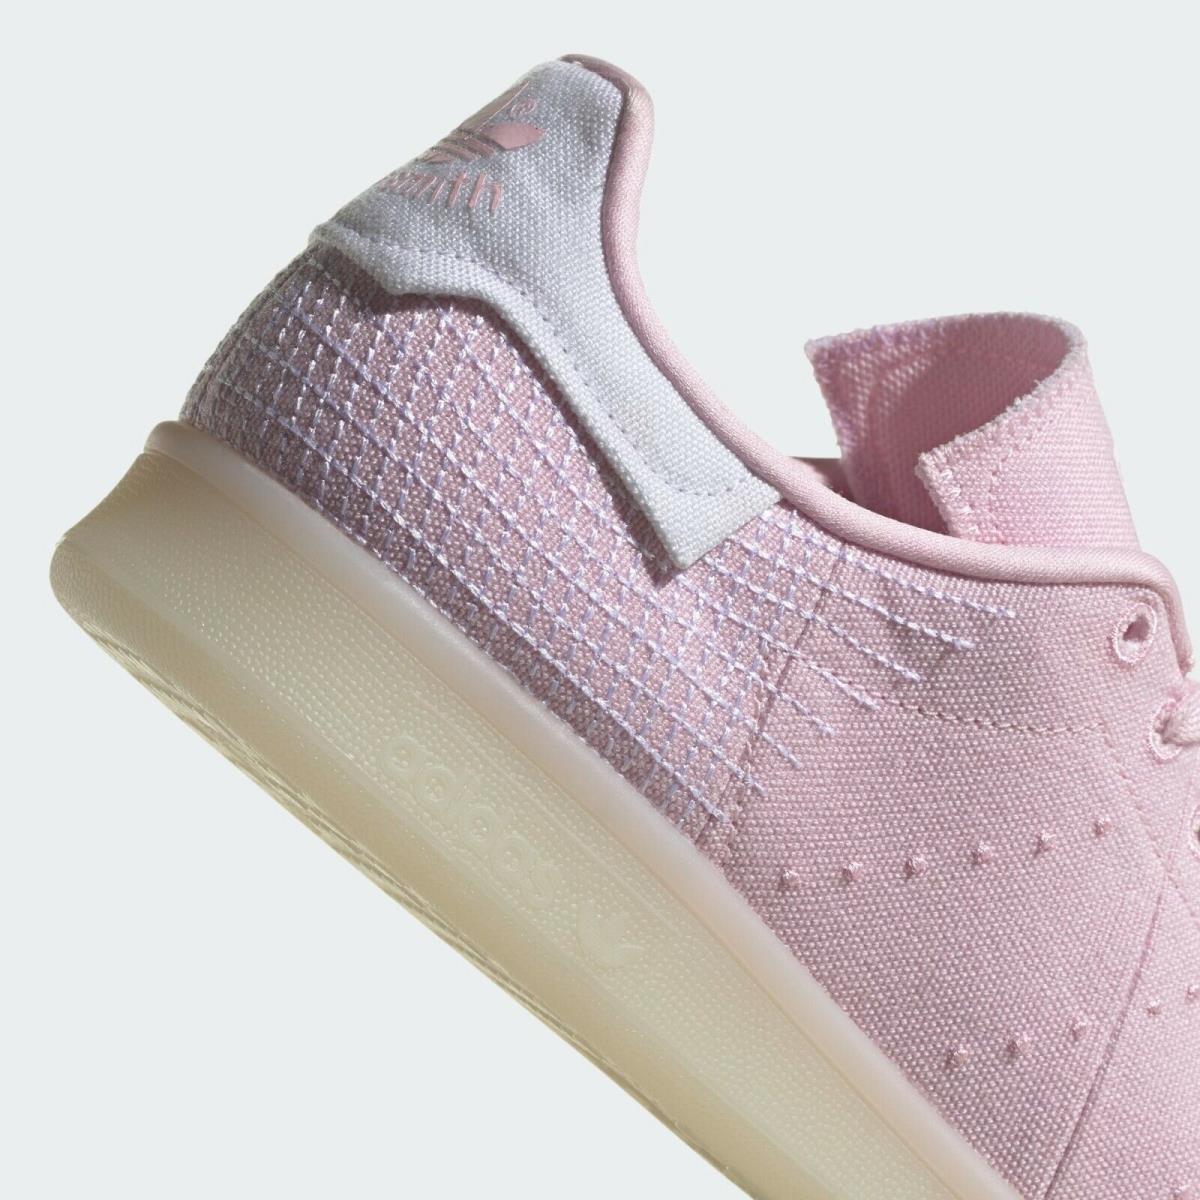 Adidas shoes STAN SMITH PRIMEBLUE - Clear Pink / Cloud White / Core Black 7